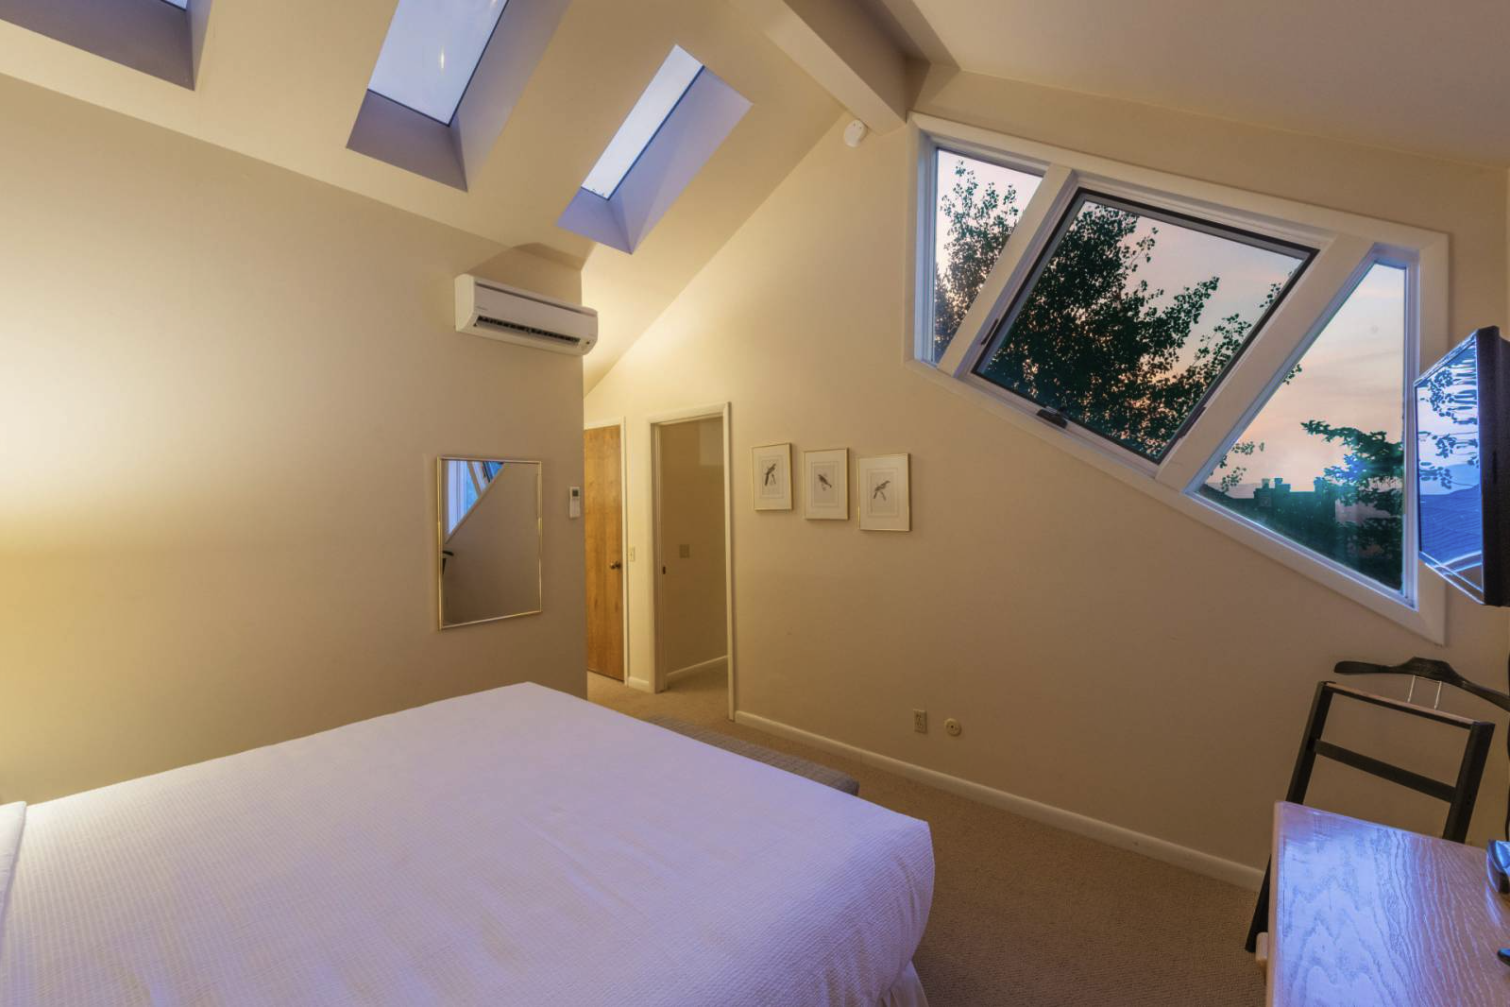 Top floor Master Bedroom with King bed and ensuite bathroom. Funky windows and great views!